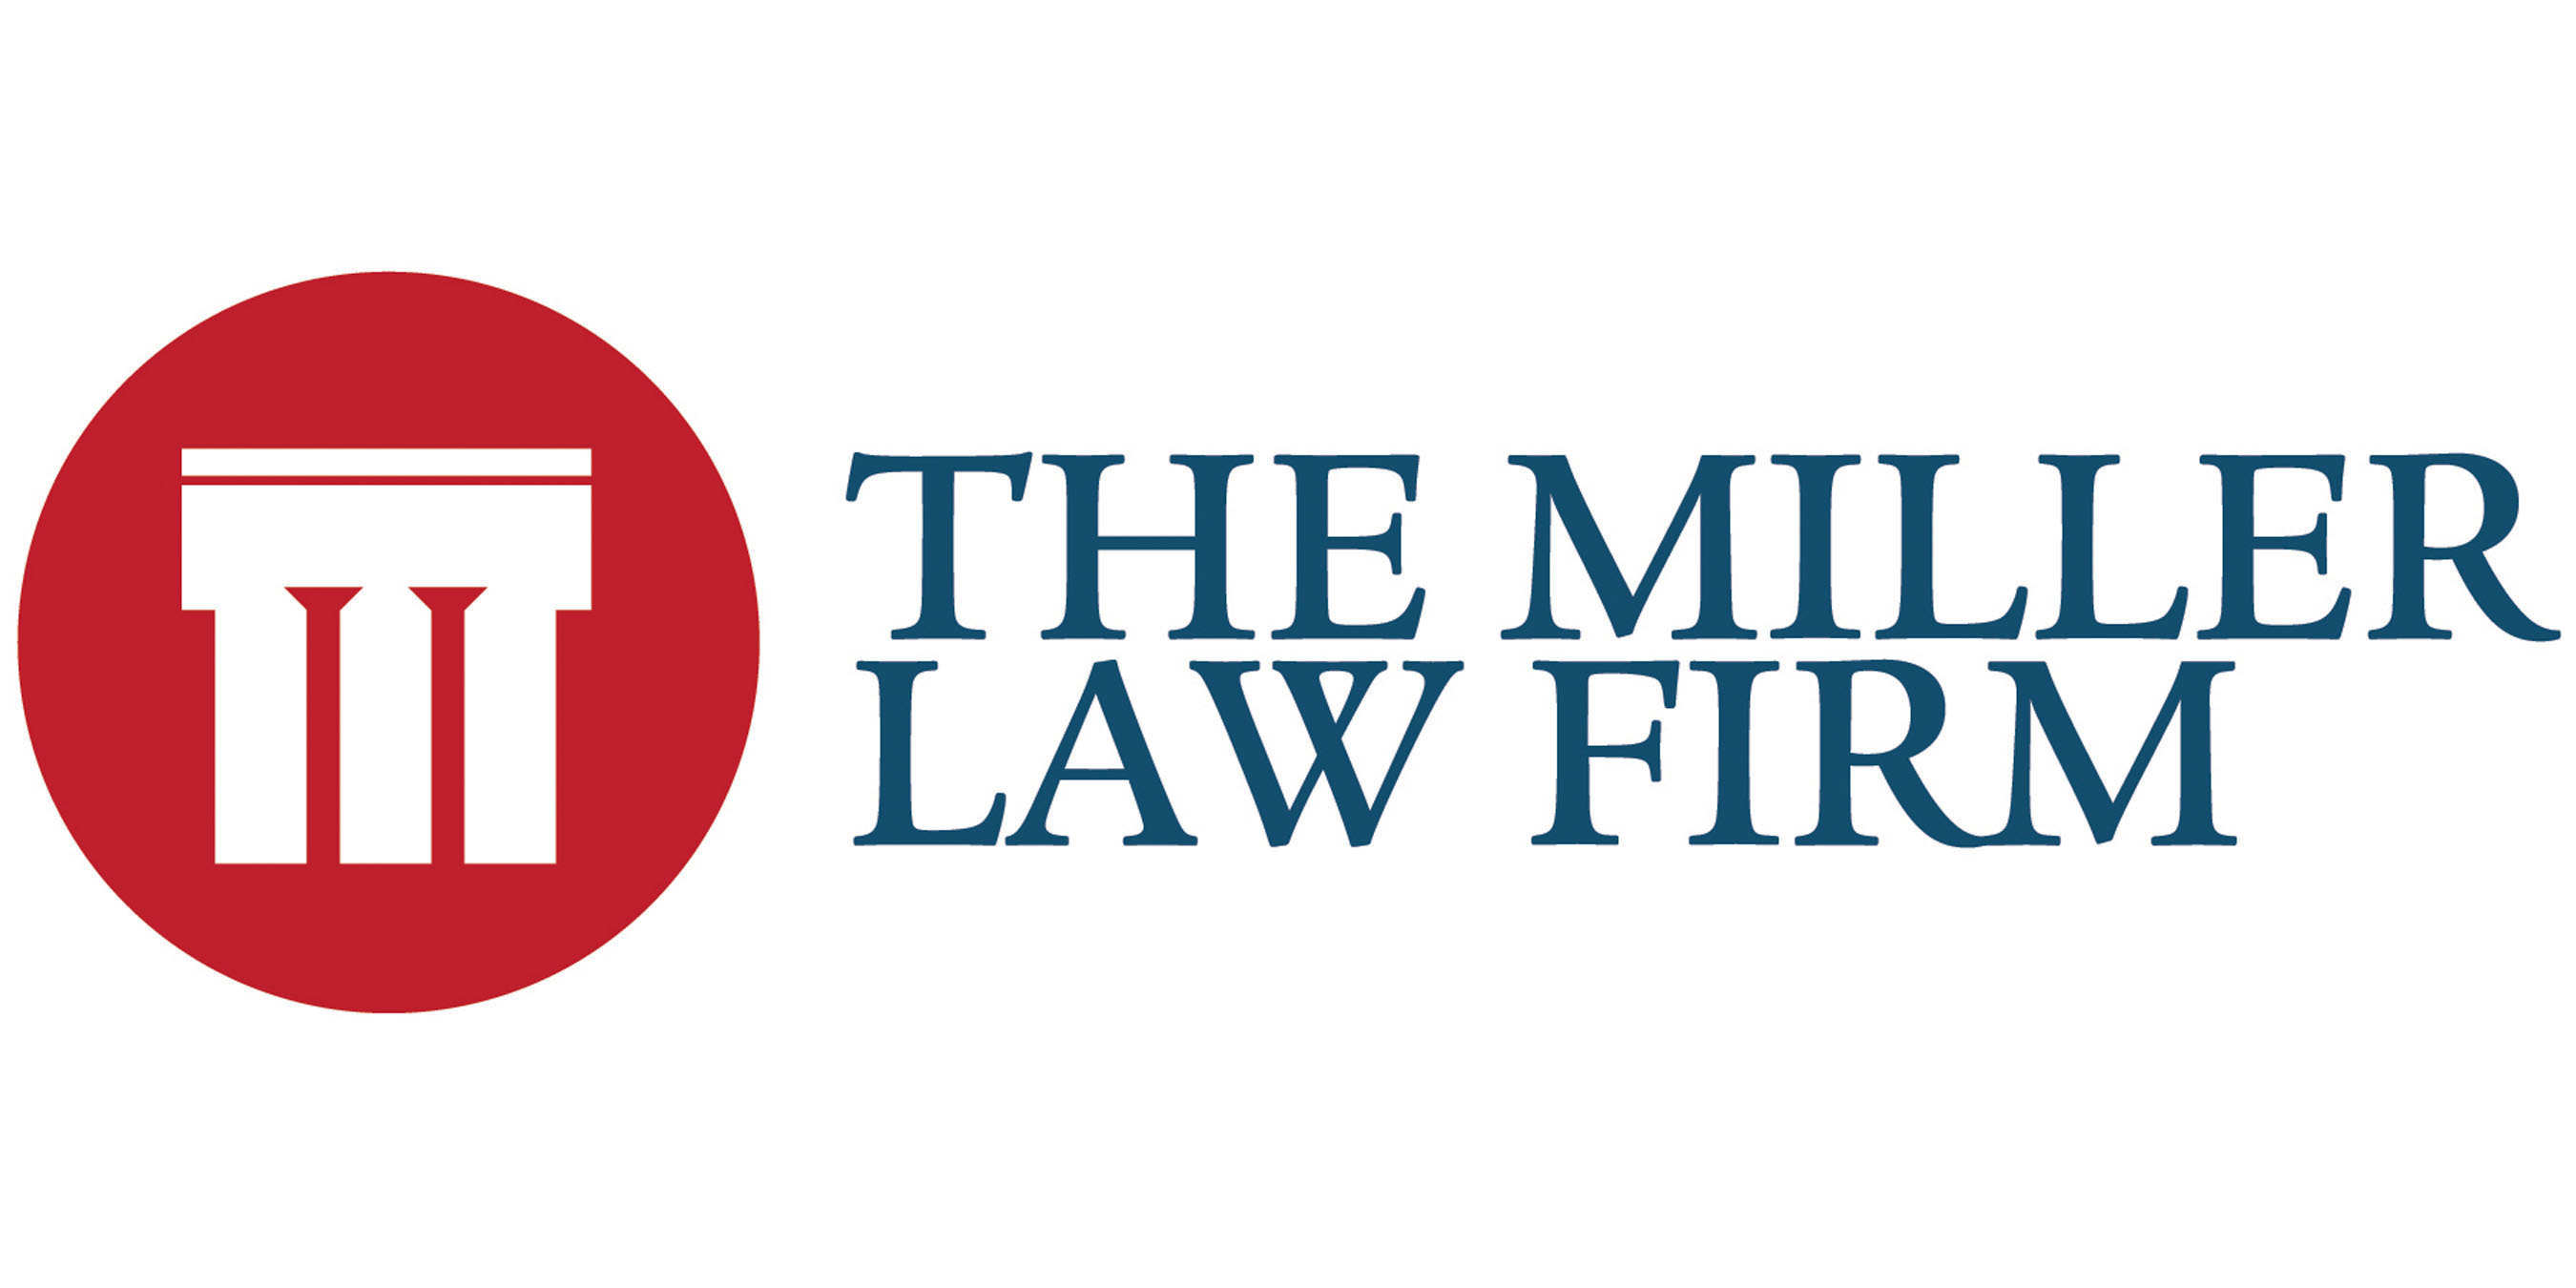 The Miller Law Firm logo. (PRNewsFoto/The Miller Law Firm)